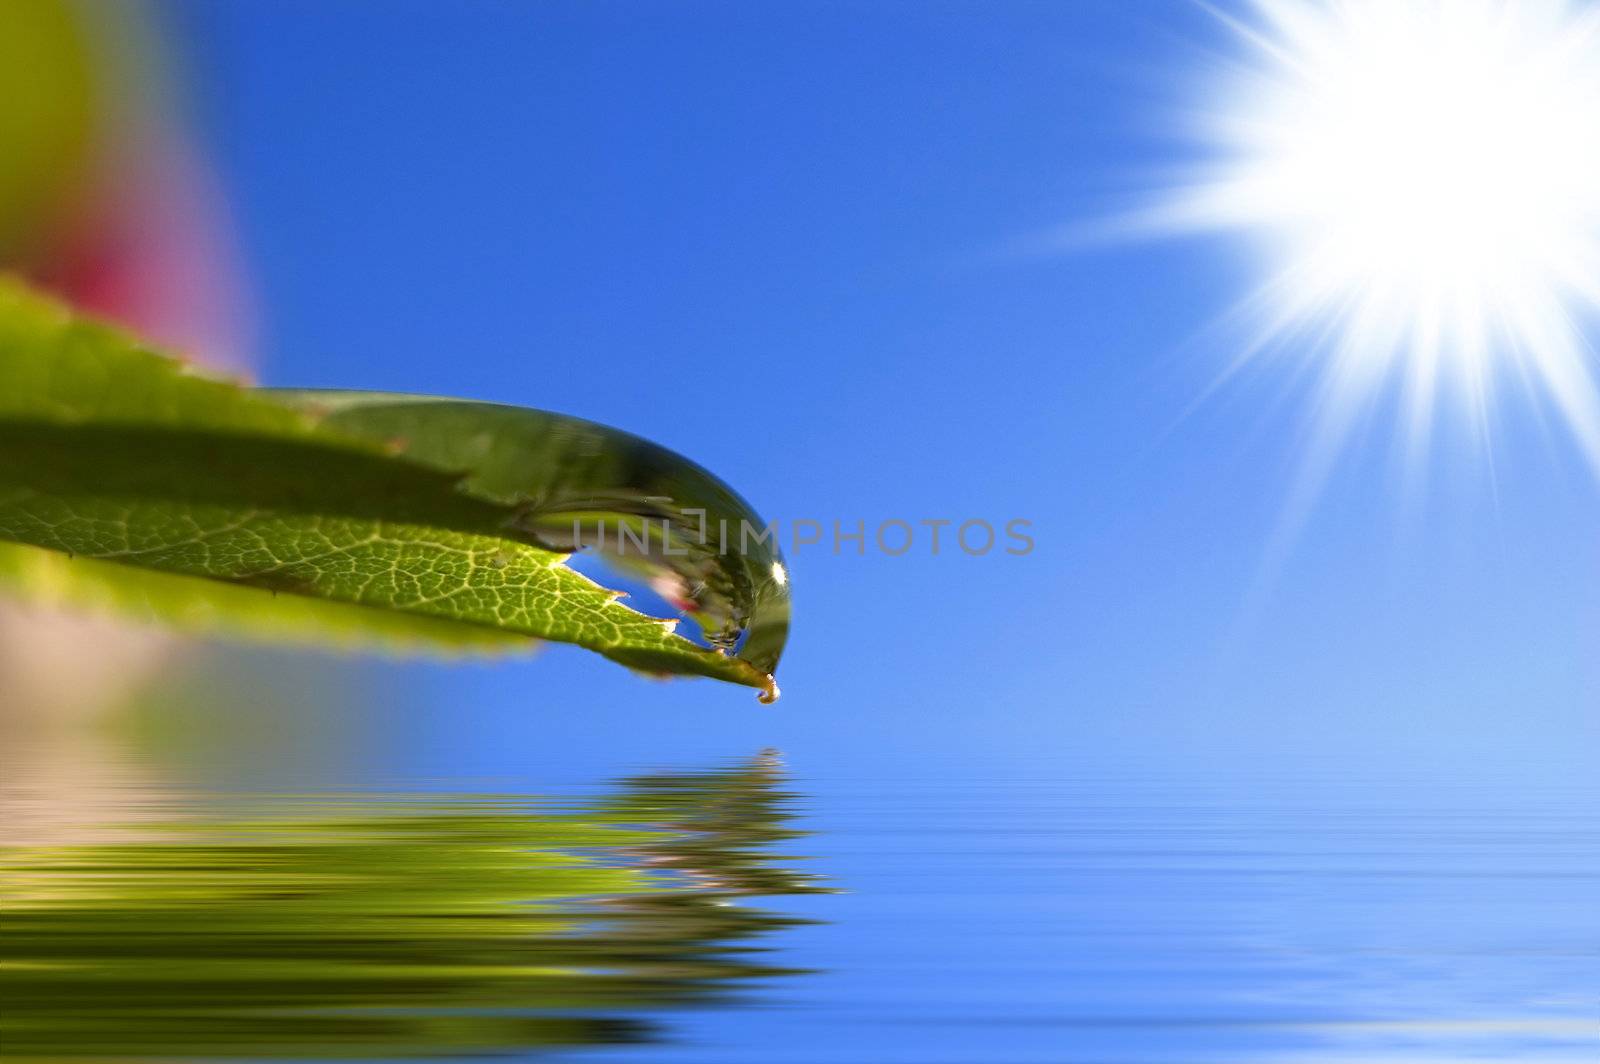 Leaf with drop and the sun in the blue sky and reflex in the water